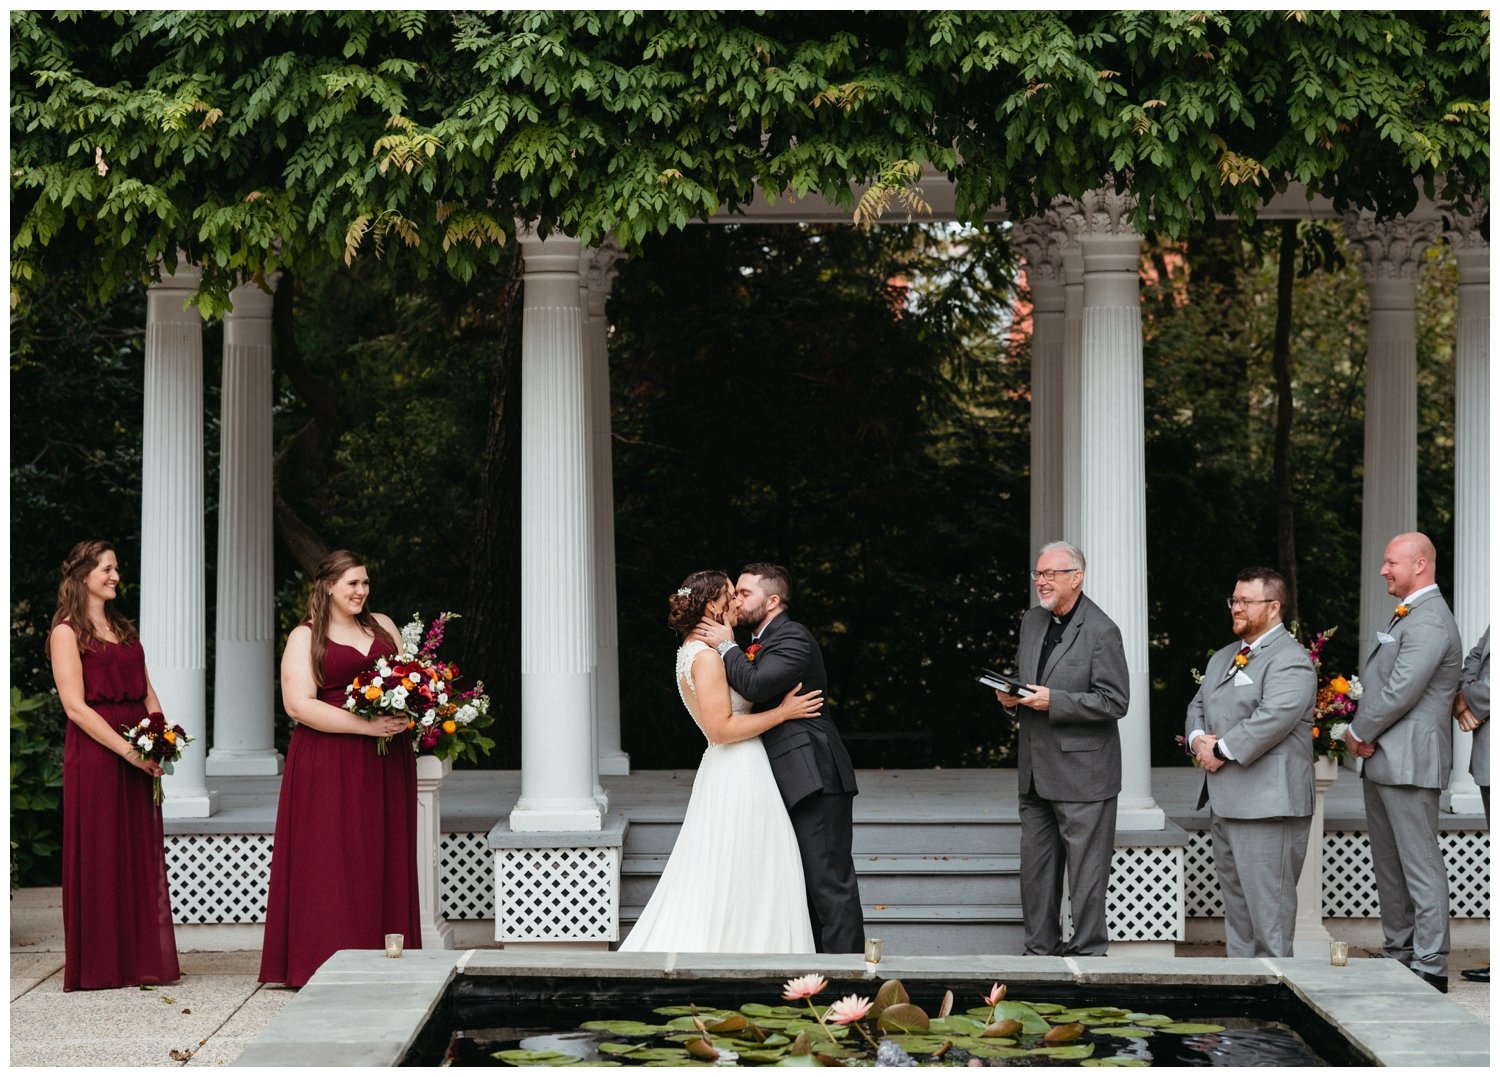 An intimate destination wedding ceremony in front of a reflecting pool